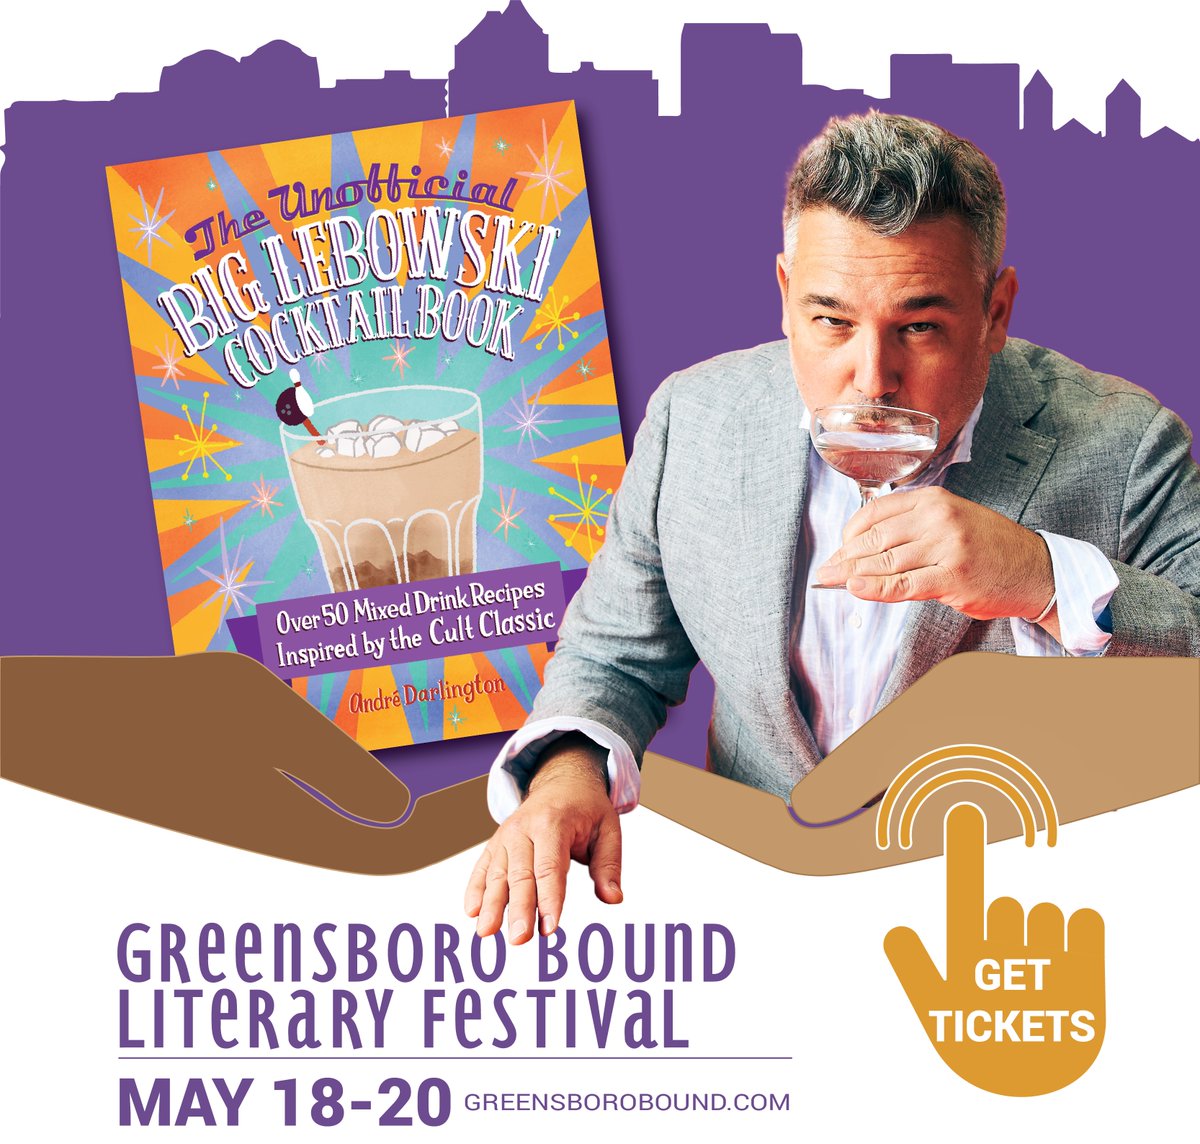 Greensboro Bound's Literary Festival kicks off 5/18 with @andredarlington 's The Unofficial Big Lebowski Cocktail Book, drinks, trivia, raffle & costumes! This fundraiser is ticketed: bit.ly/3UhdtnU #GB2023 #thebiglebowski @ScupBooks @GreenhillNC @NCArtsCouncil @NEAarts